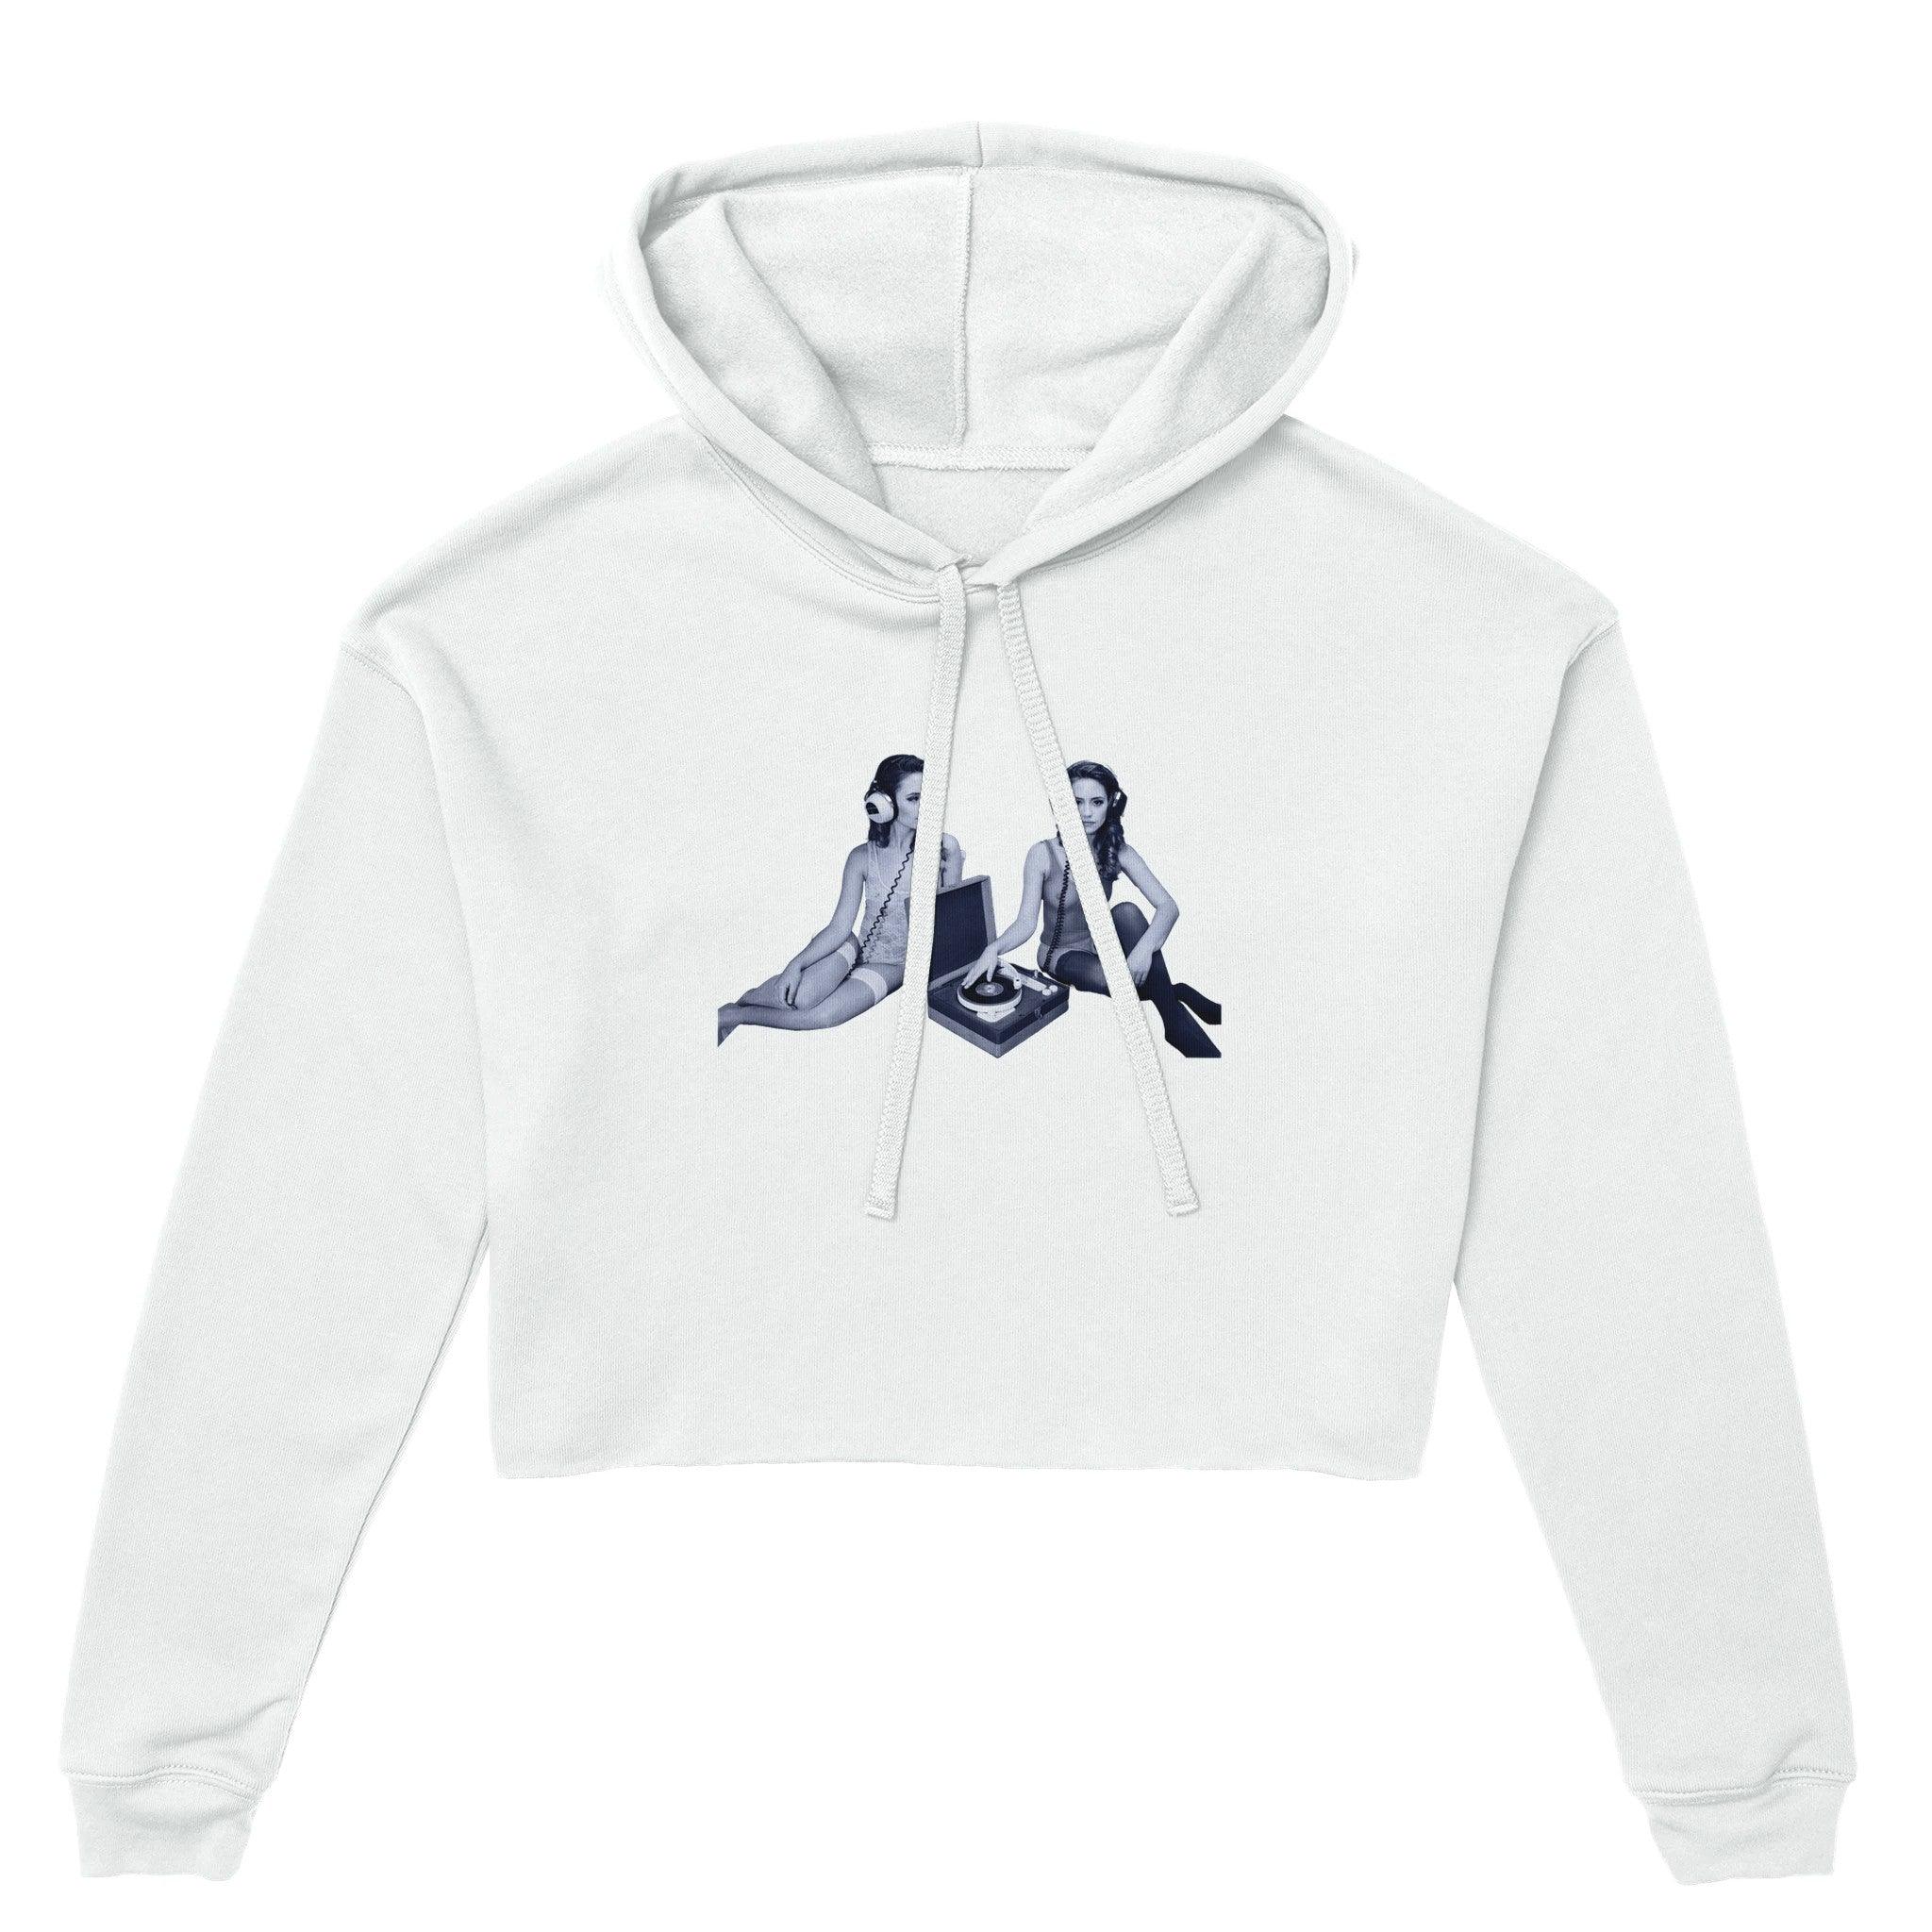 'Pre-Party' Cropped Hoodie - POMA